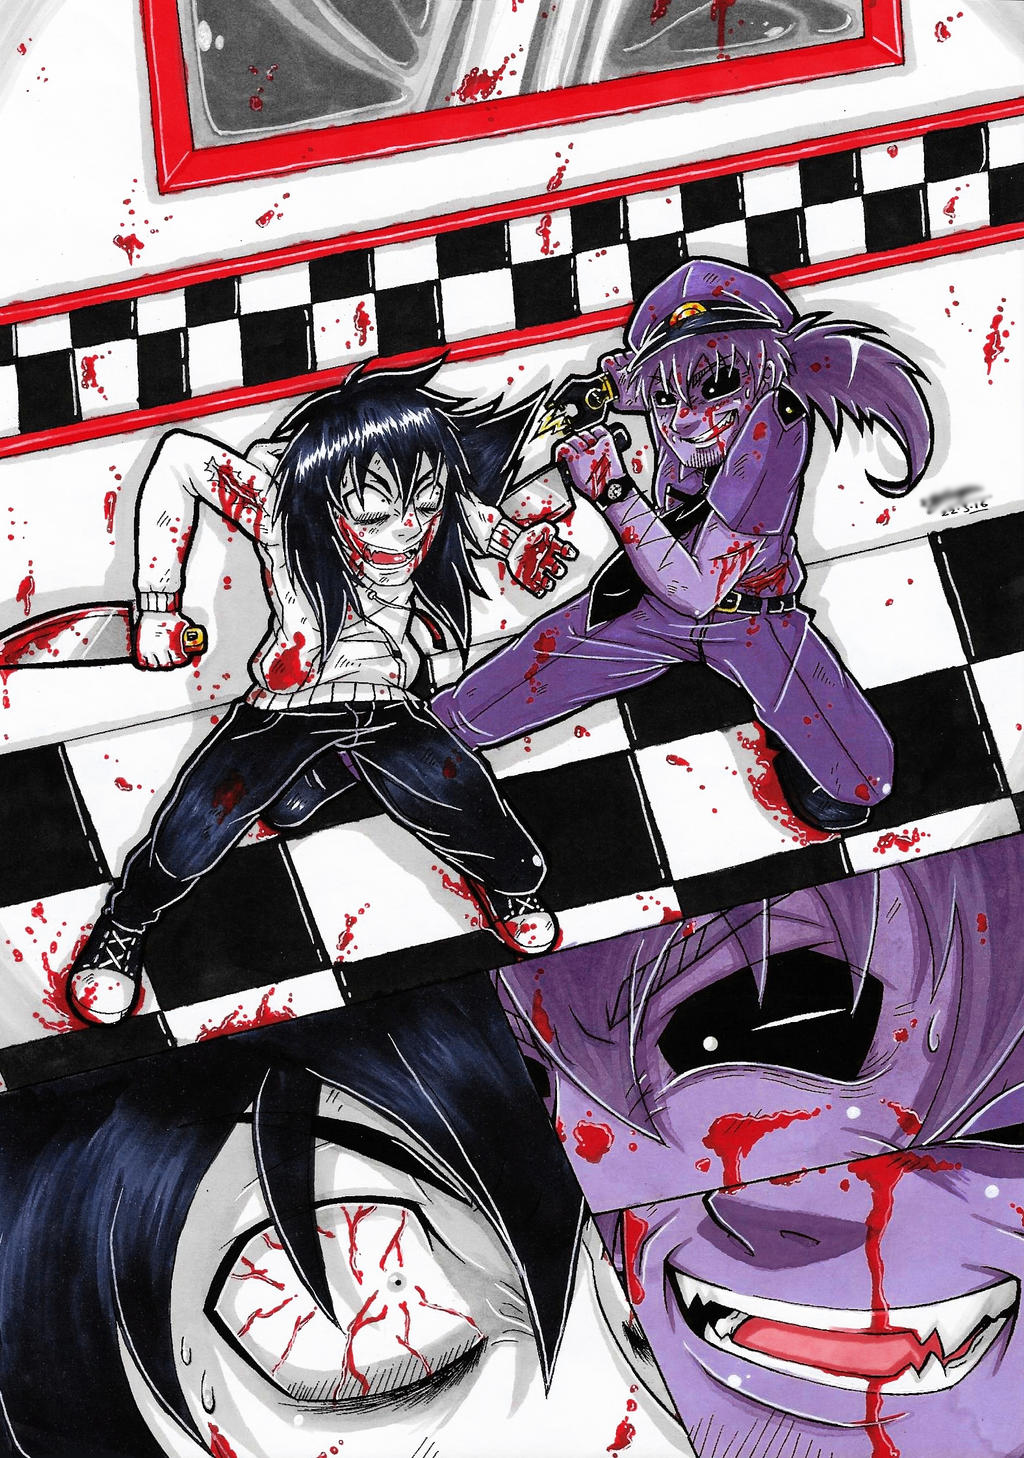 Jeff the Killer by LeviLord004 on Newgrounds